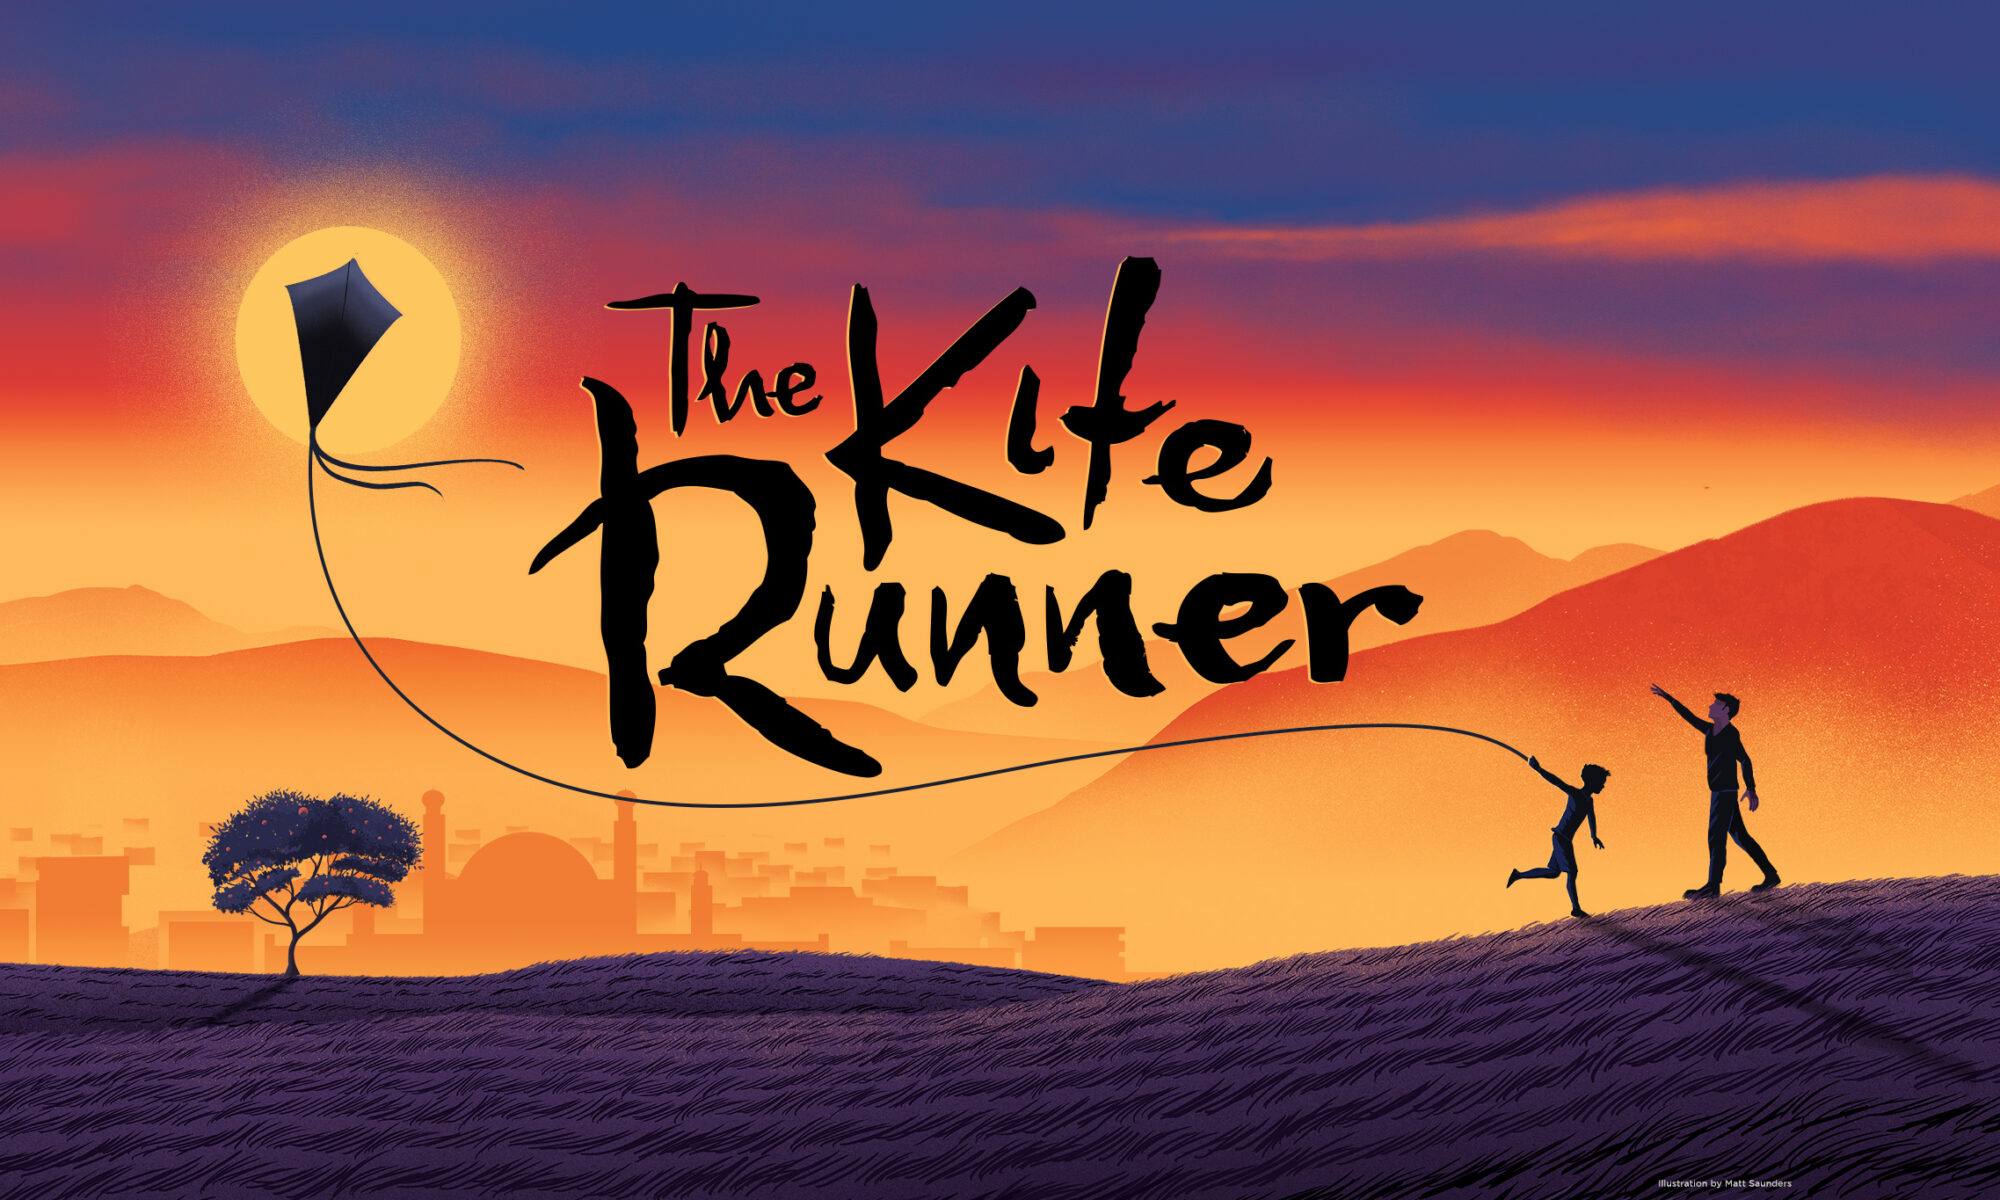 The Kite Runner. Boy holding a kite running on field with a sunset backdrop.